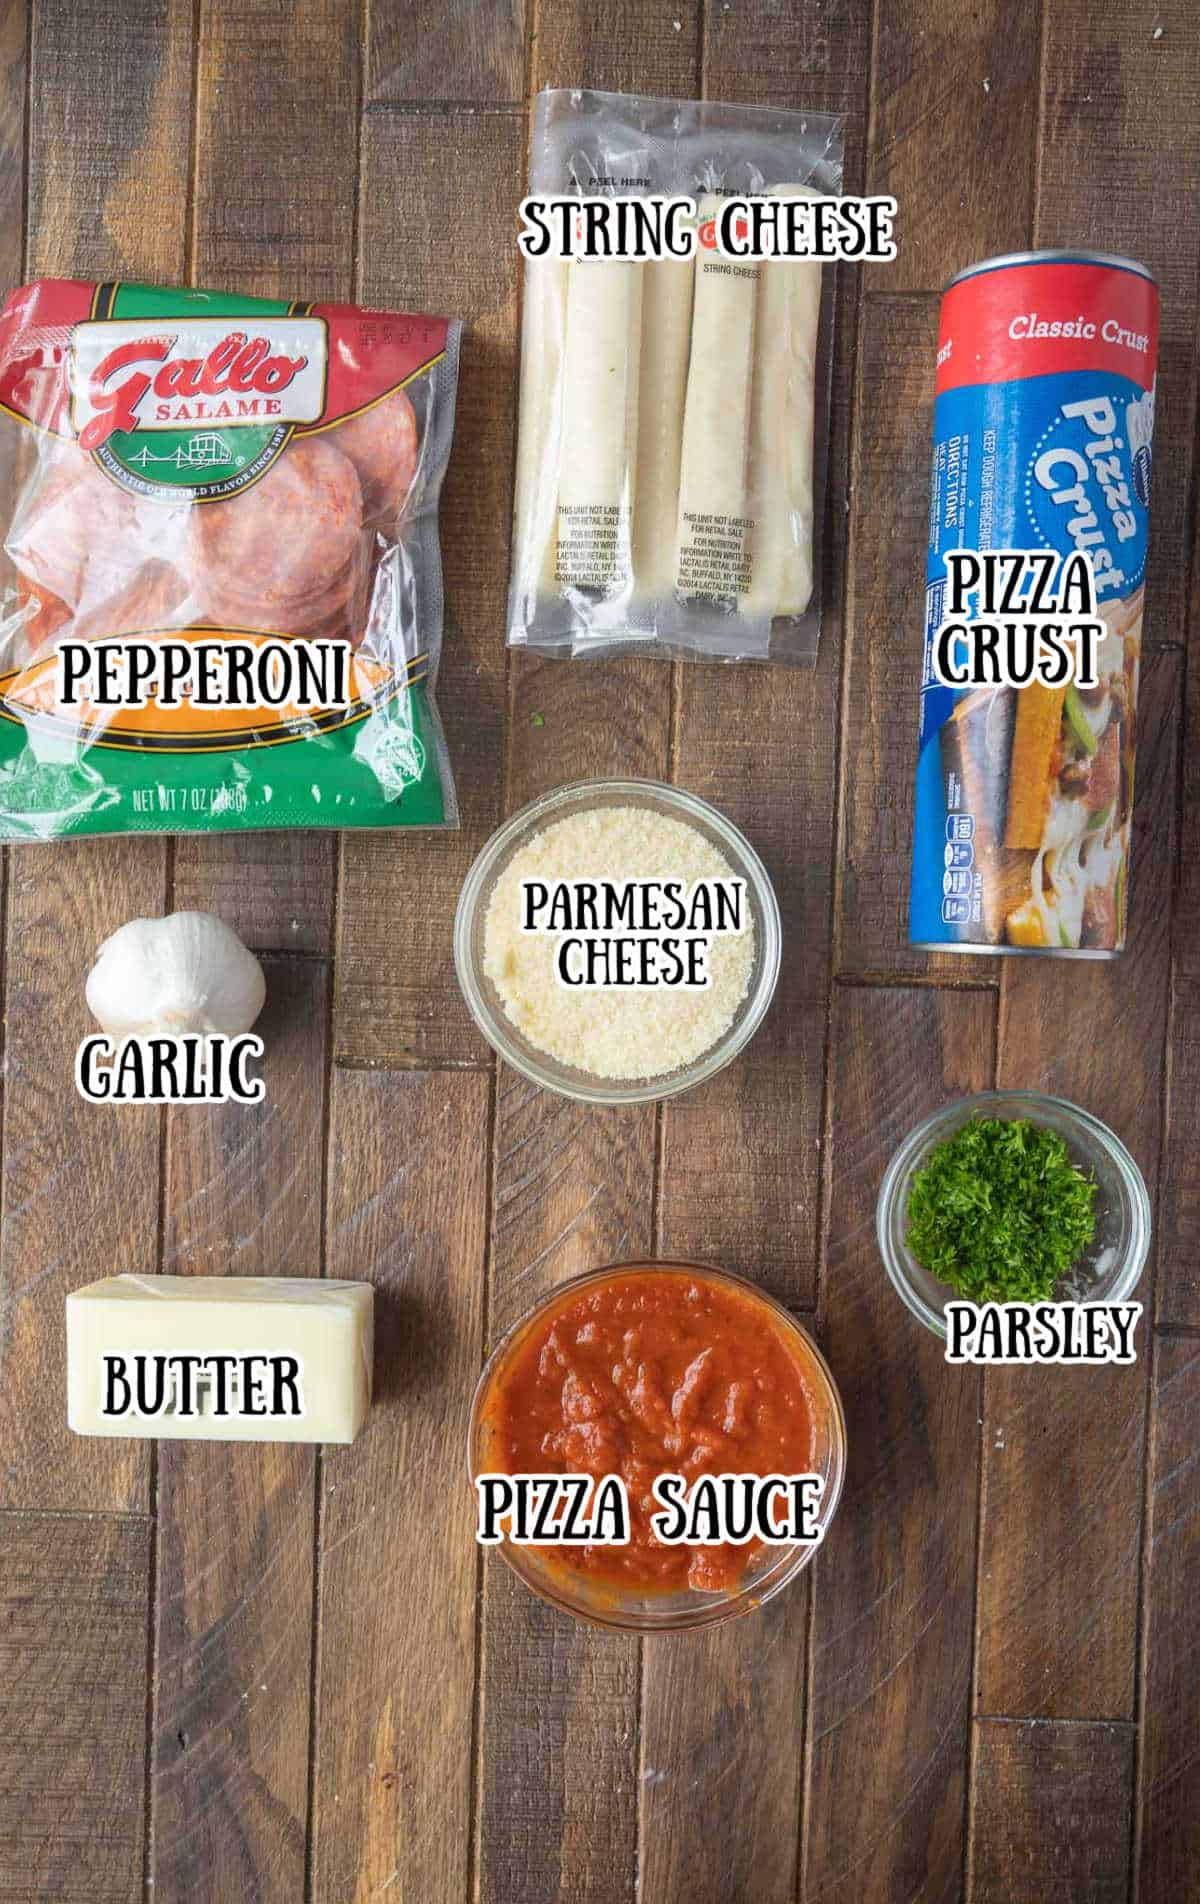 All the ingredients needed for these pizza sticks.